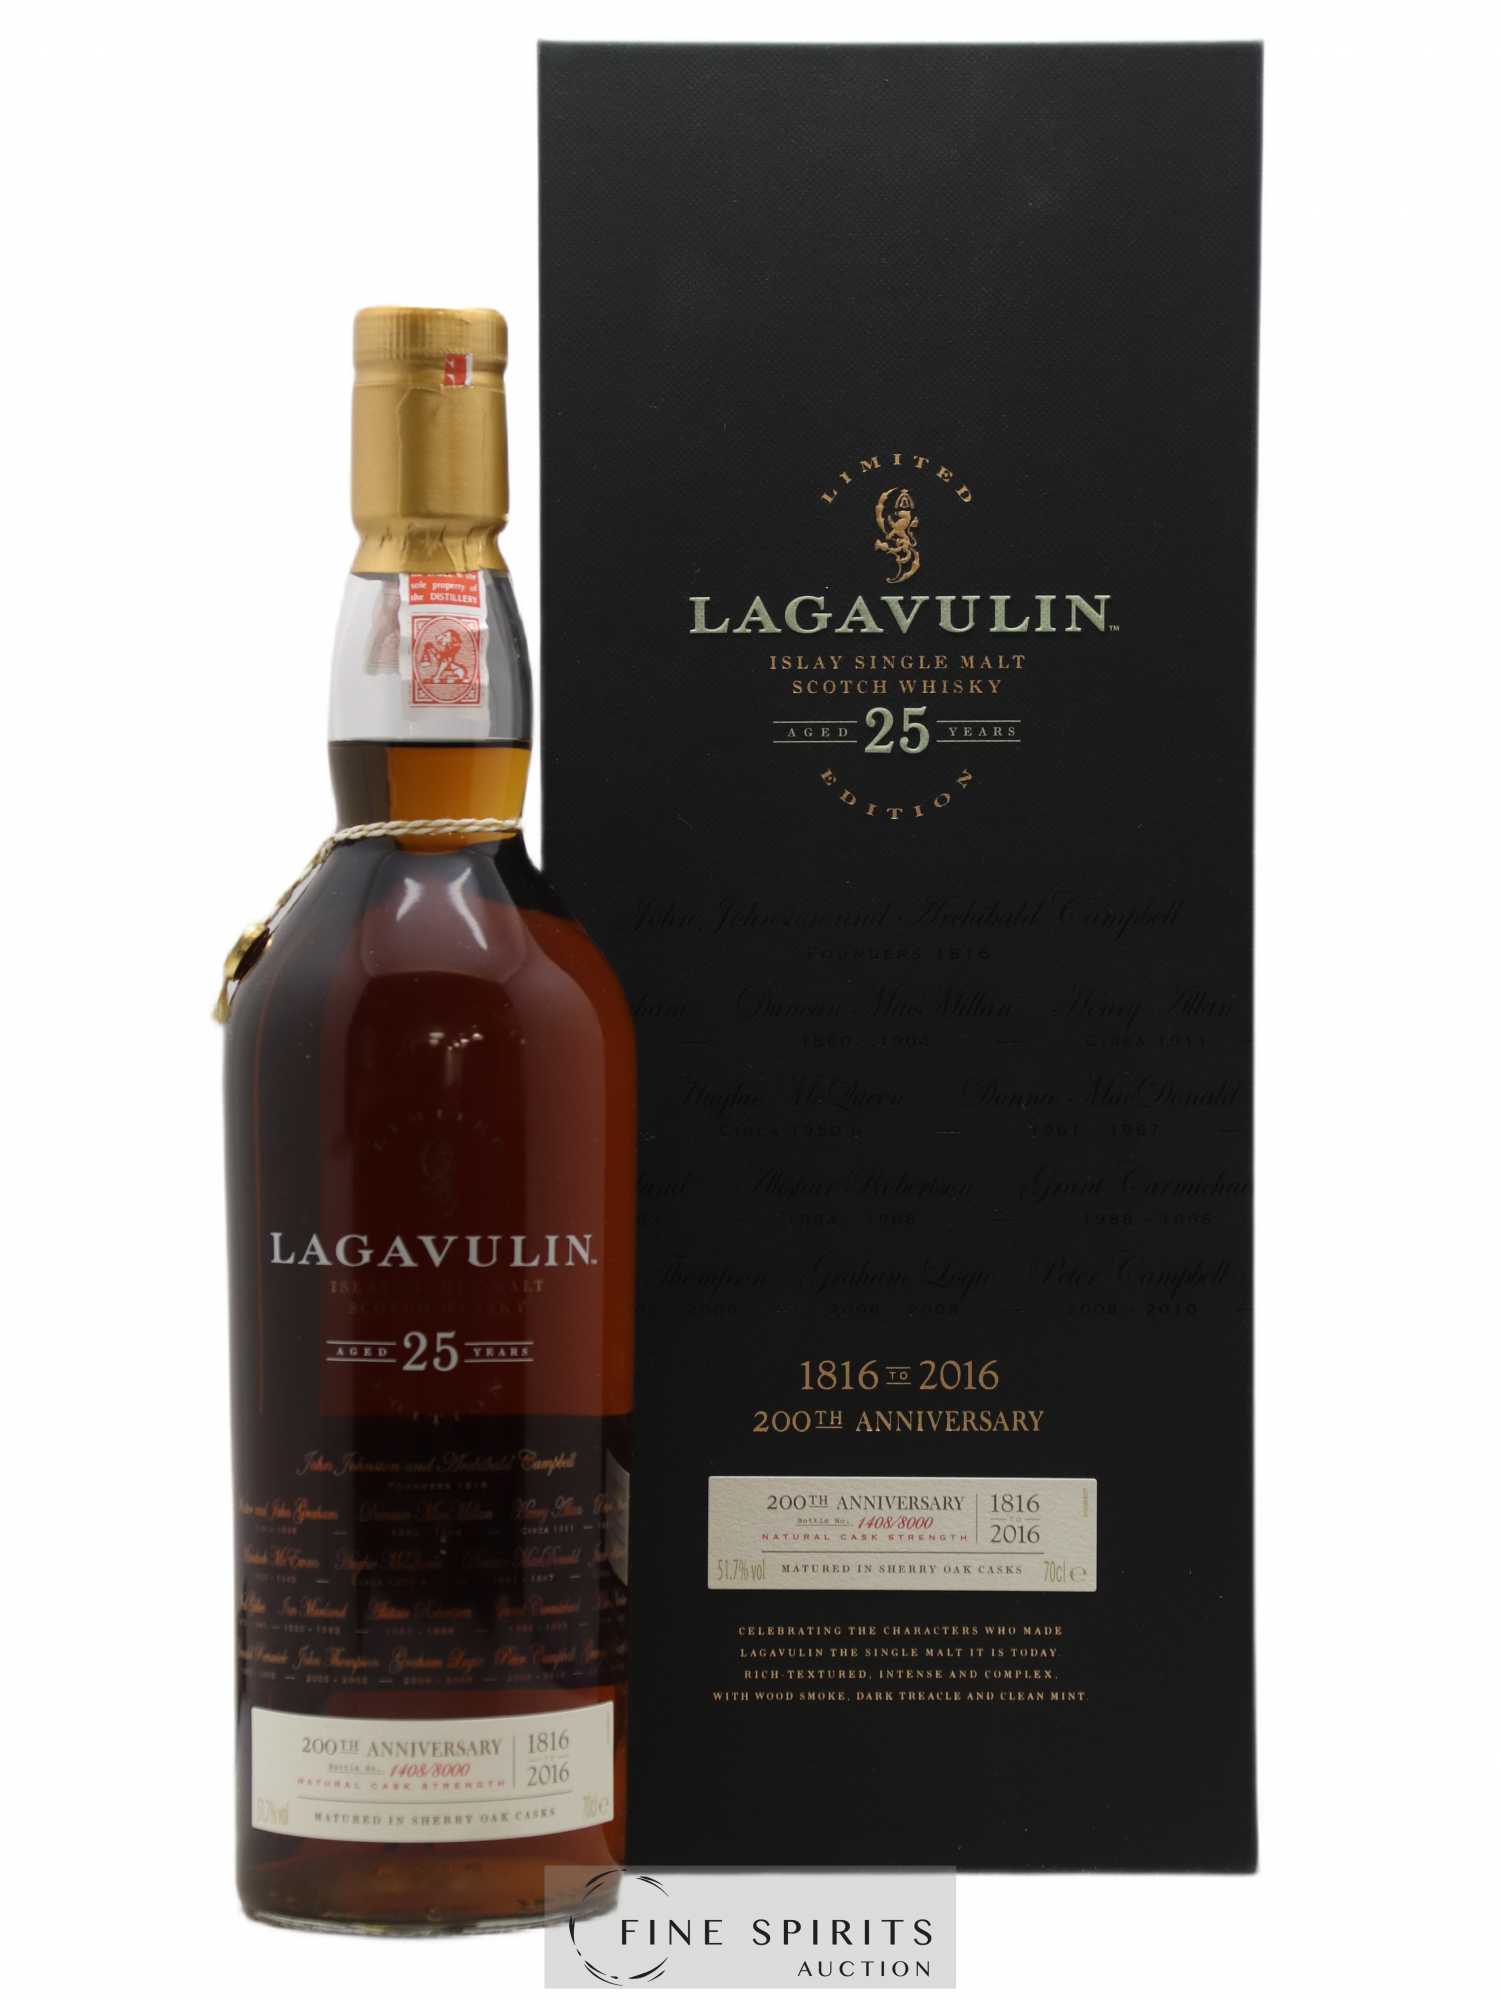 Lagavulin 25 years Of. 200th Anniversary One of 8000 - bottled 2016 